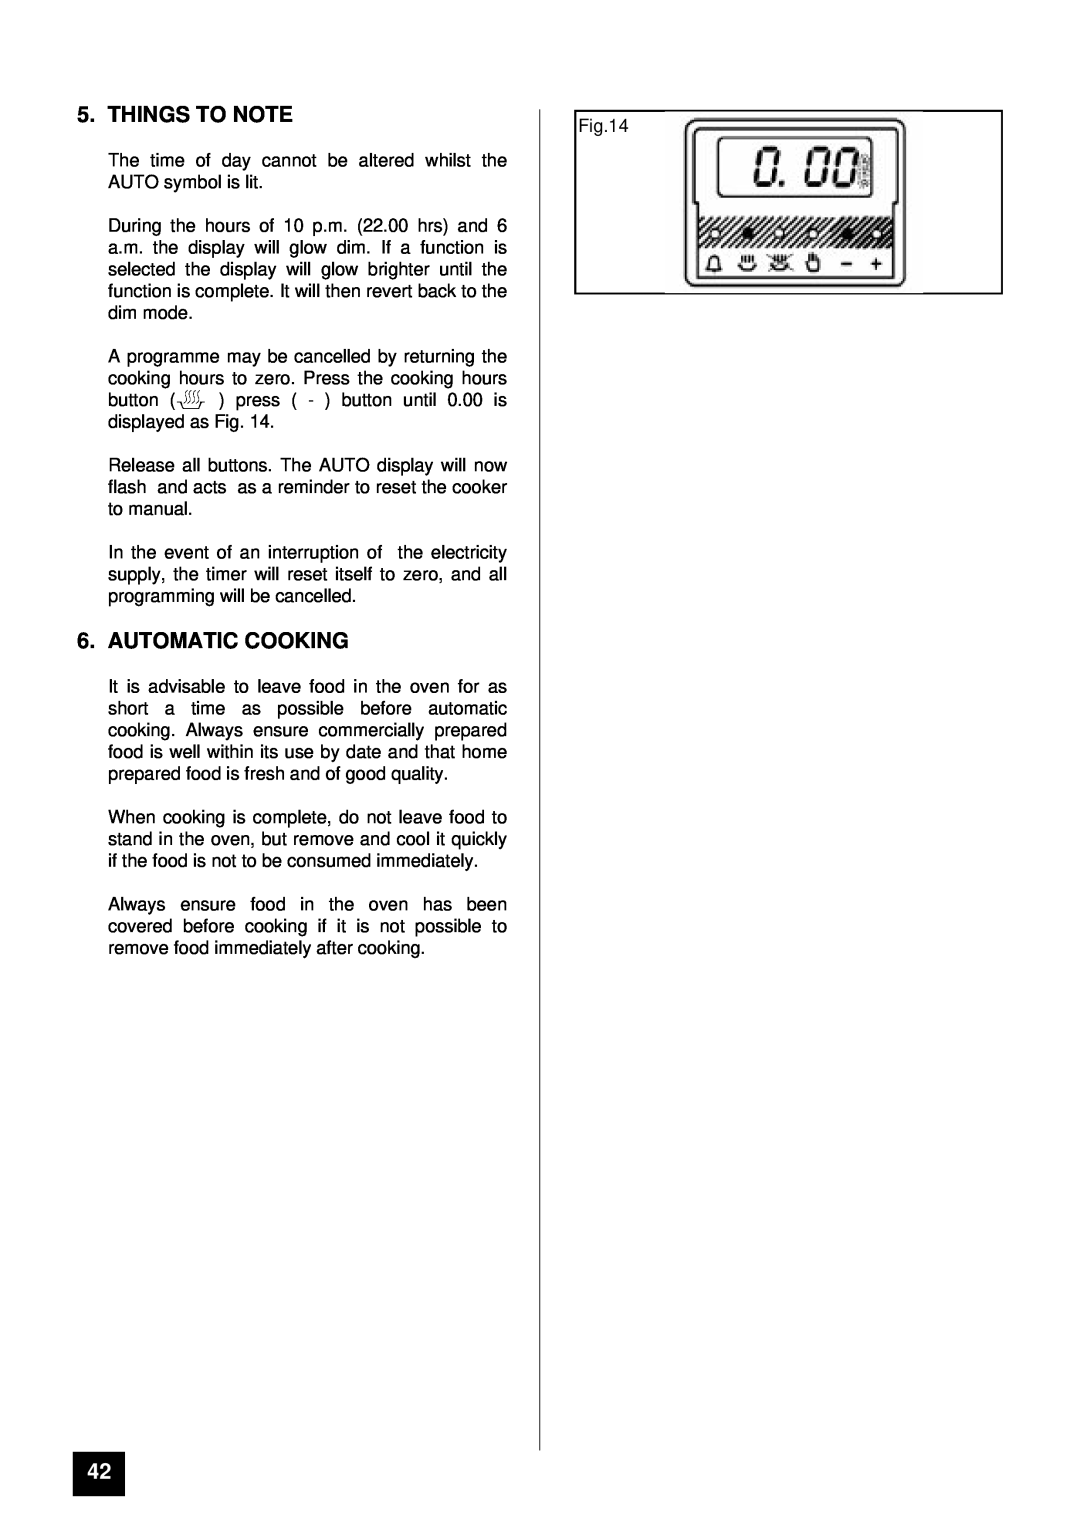 Tricity Bendix BD 921 installation instructions Things To Note, Automatic Cooking 